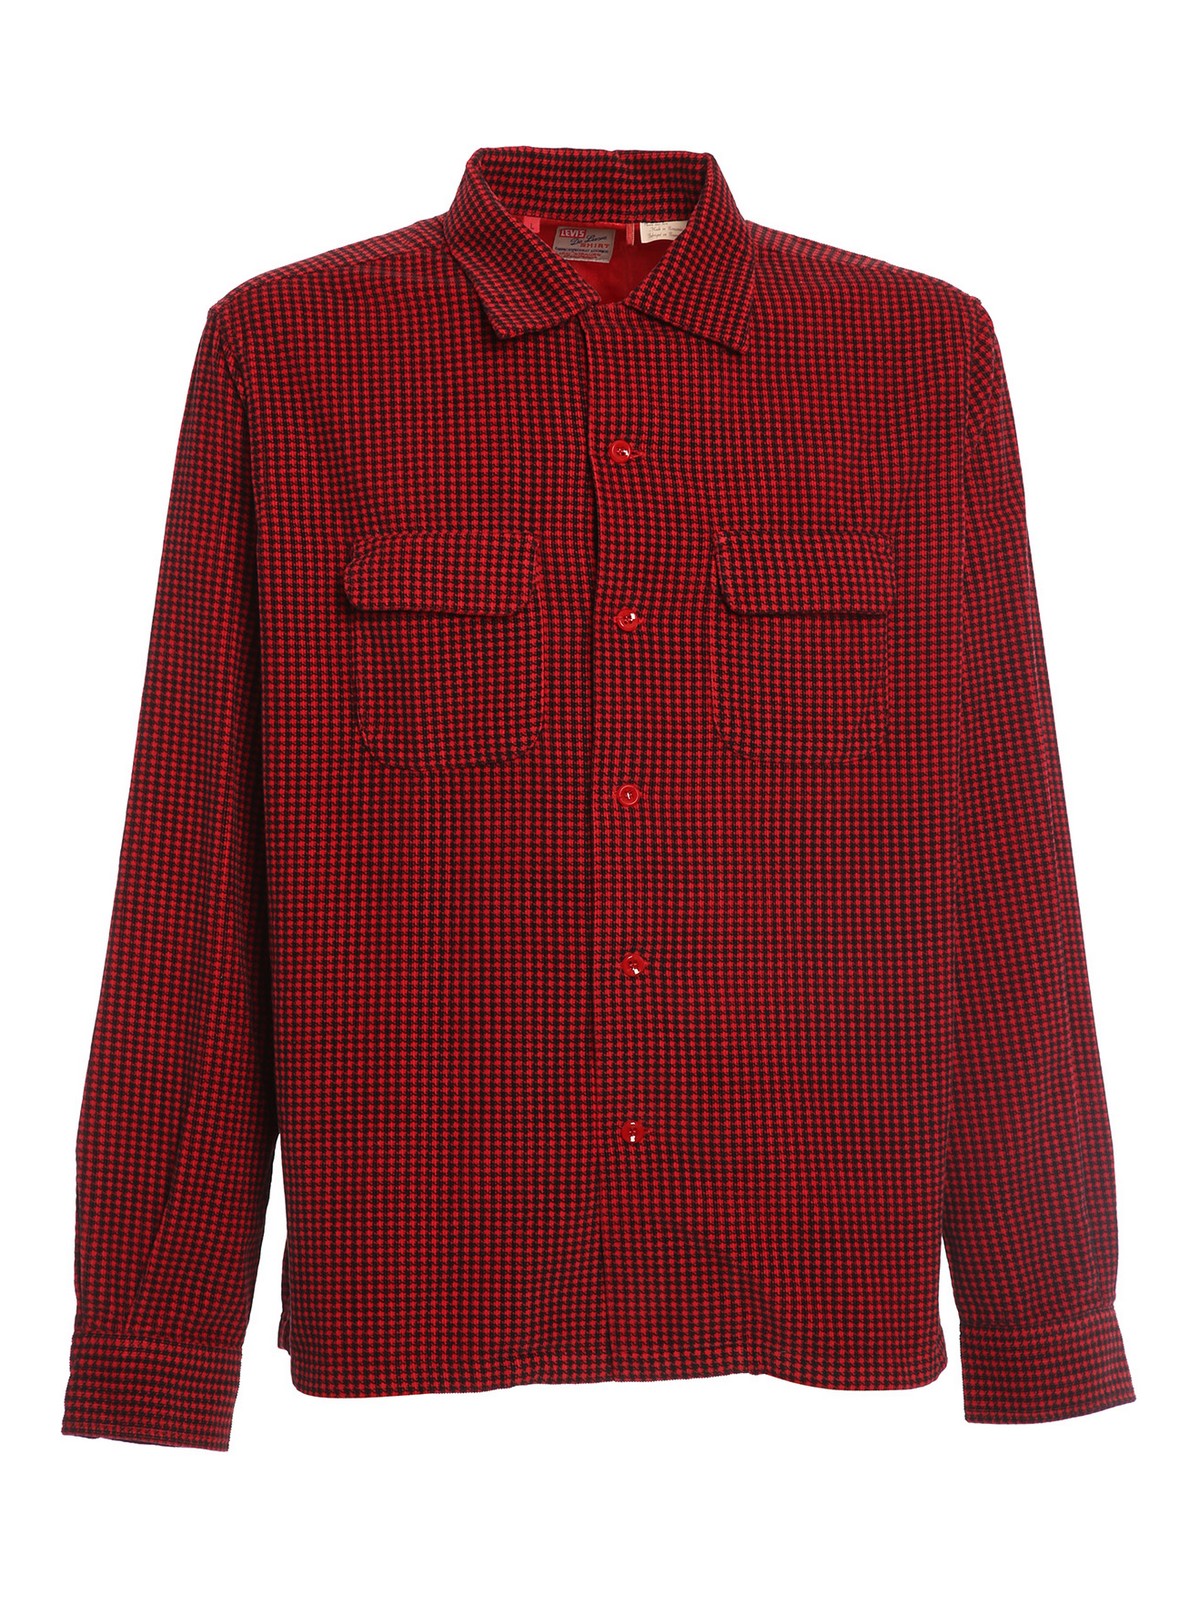 Shirts Levi'S - Deluxe - 264250002 | Shop online at THEBS